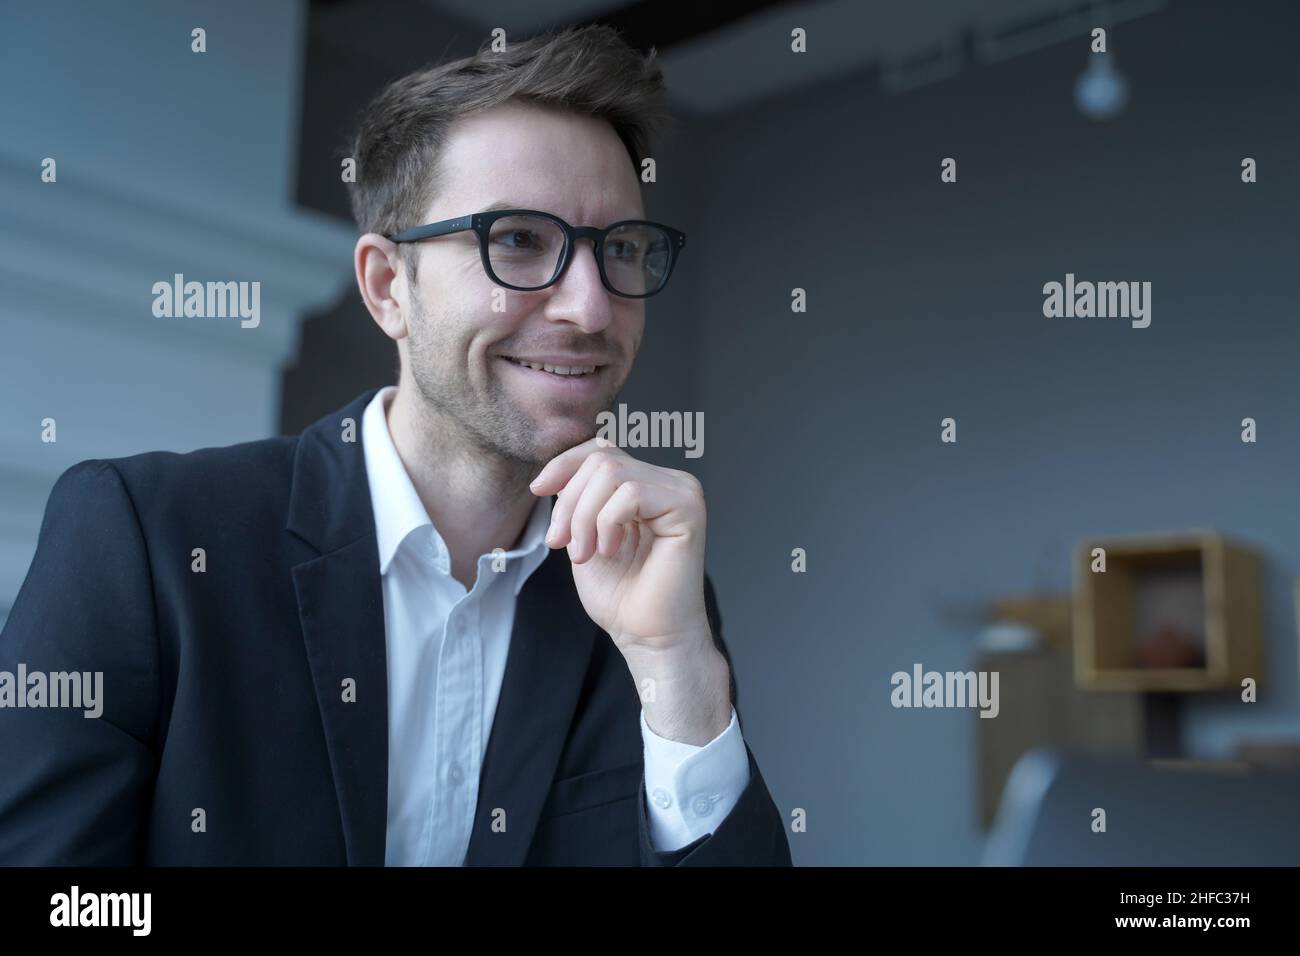 Handsome positive austrian businessman wearing glasses working remotely from home Stock Photo